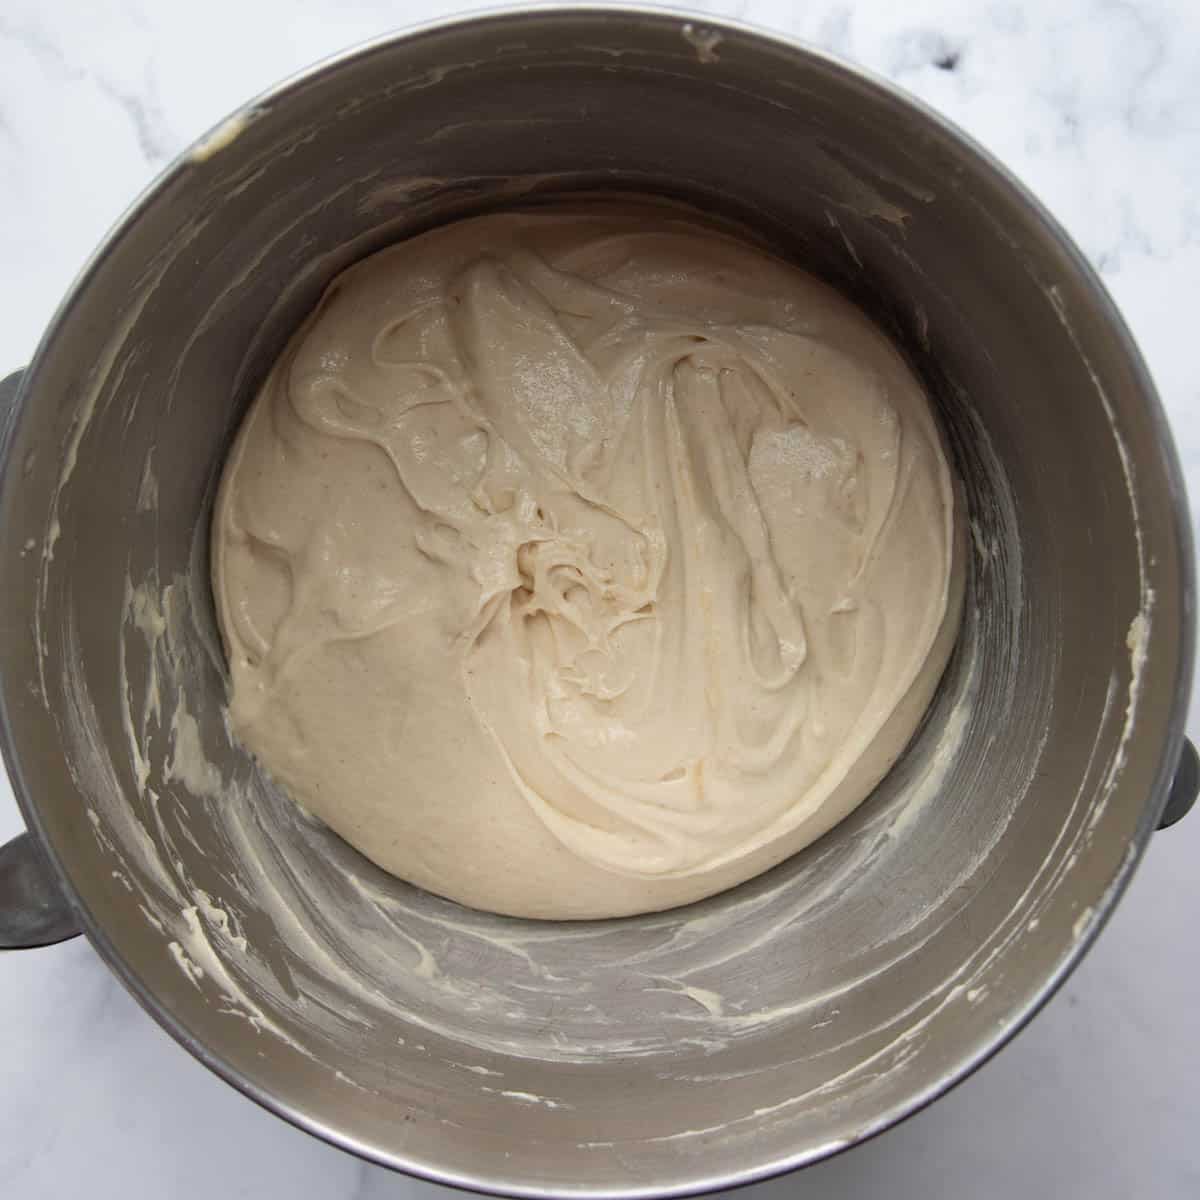 challah bread dough in a bowl before rising.